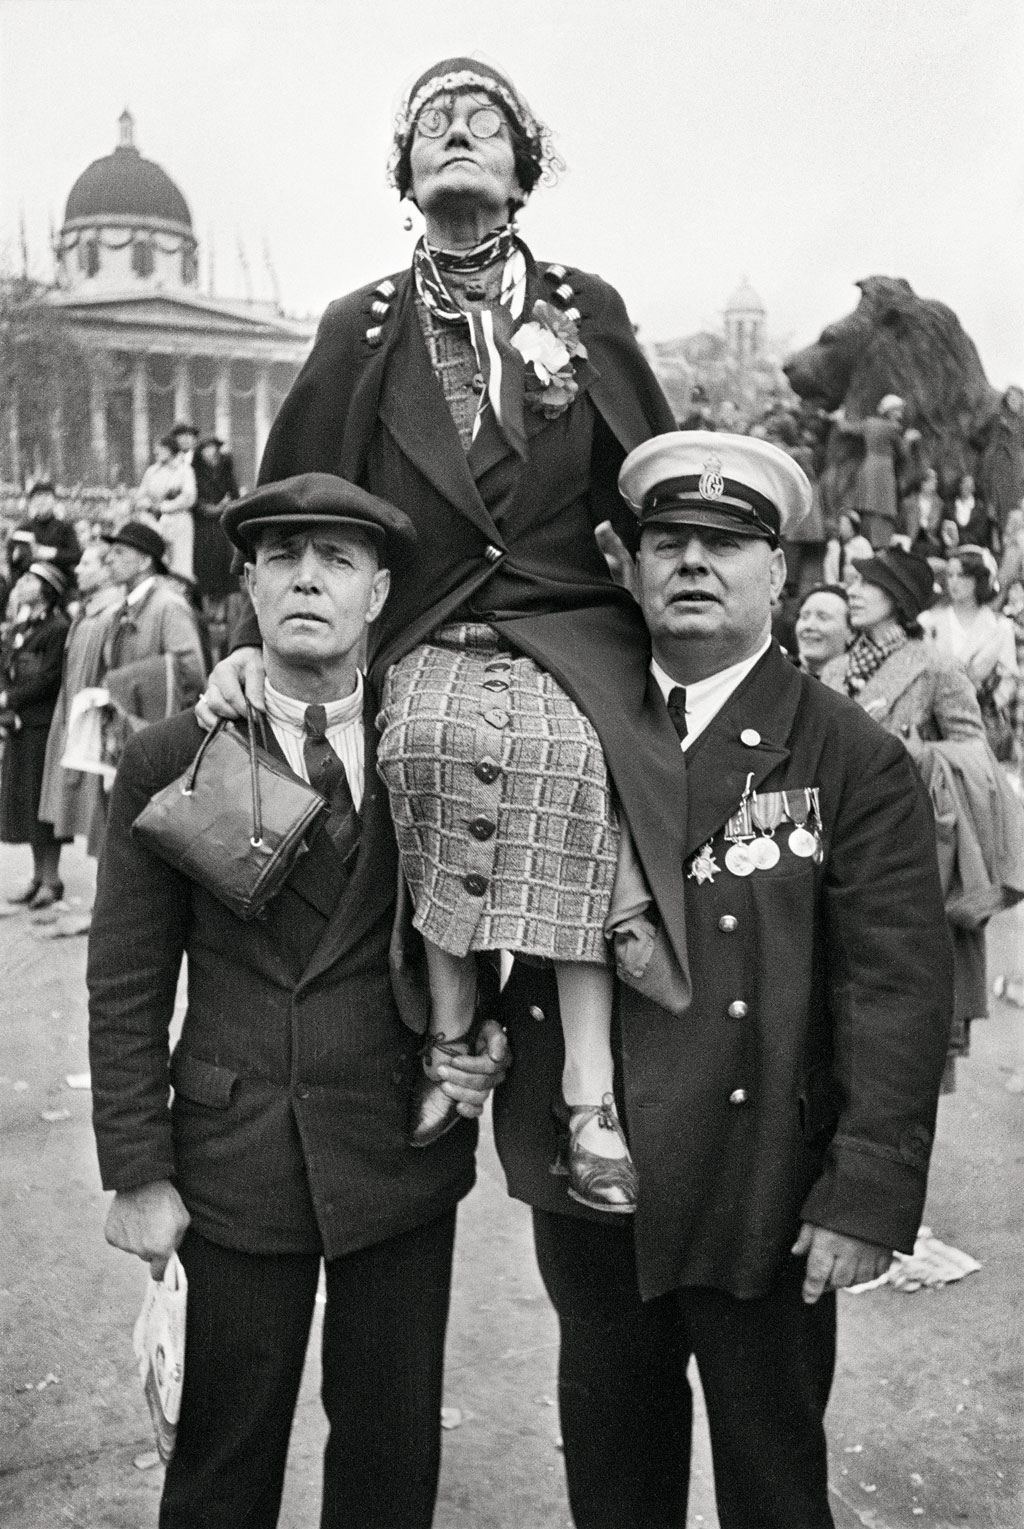 Henri Cartier Bresson The Other Coronation, coronation of George VI, street photography, photojournalism, documentary photography